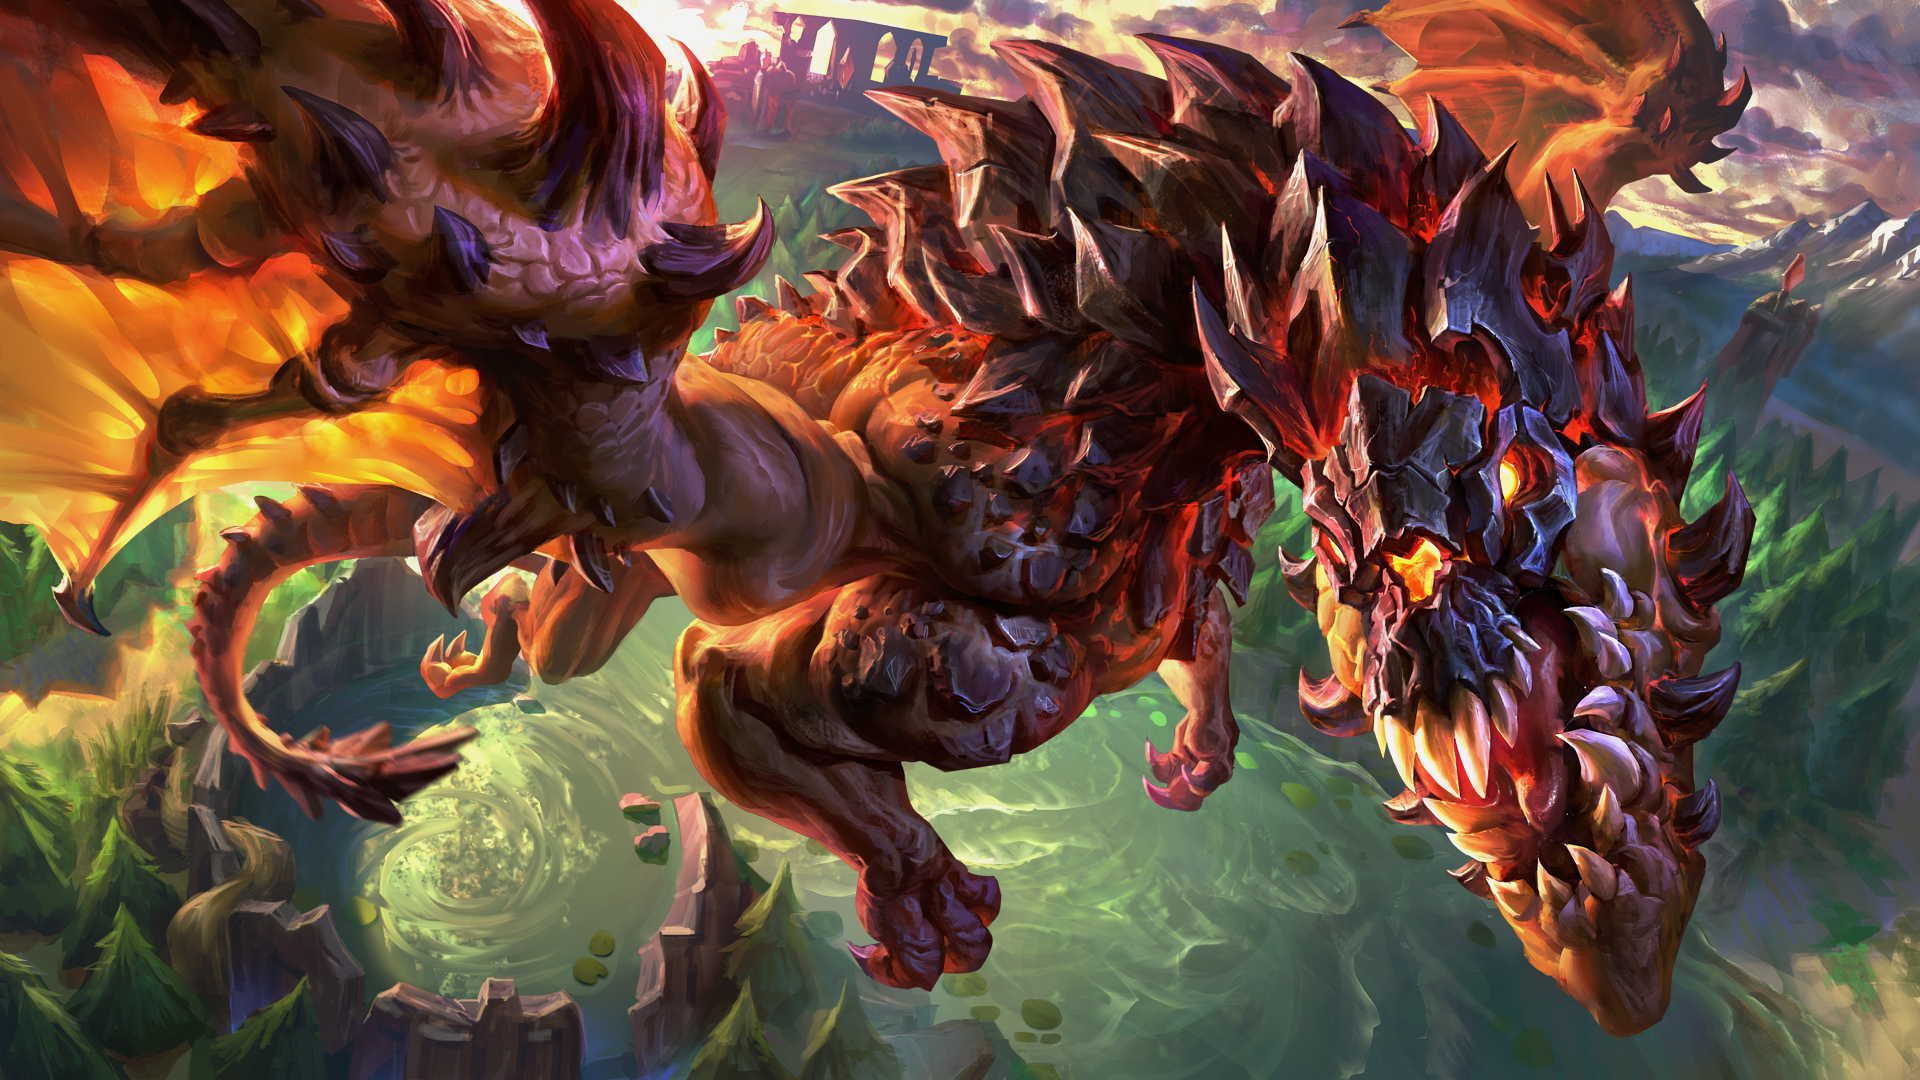 There's another elemental dragon coming to League of Legends